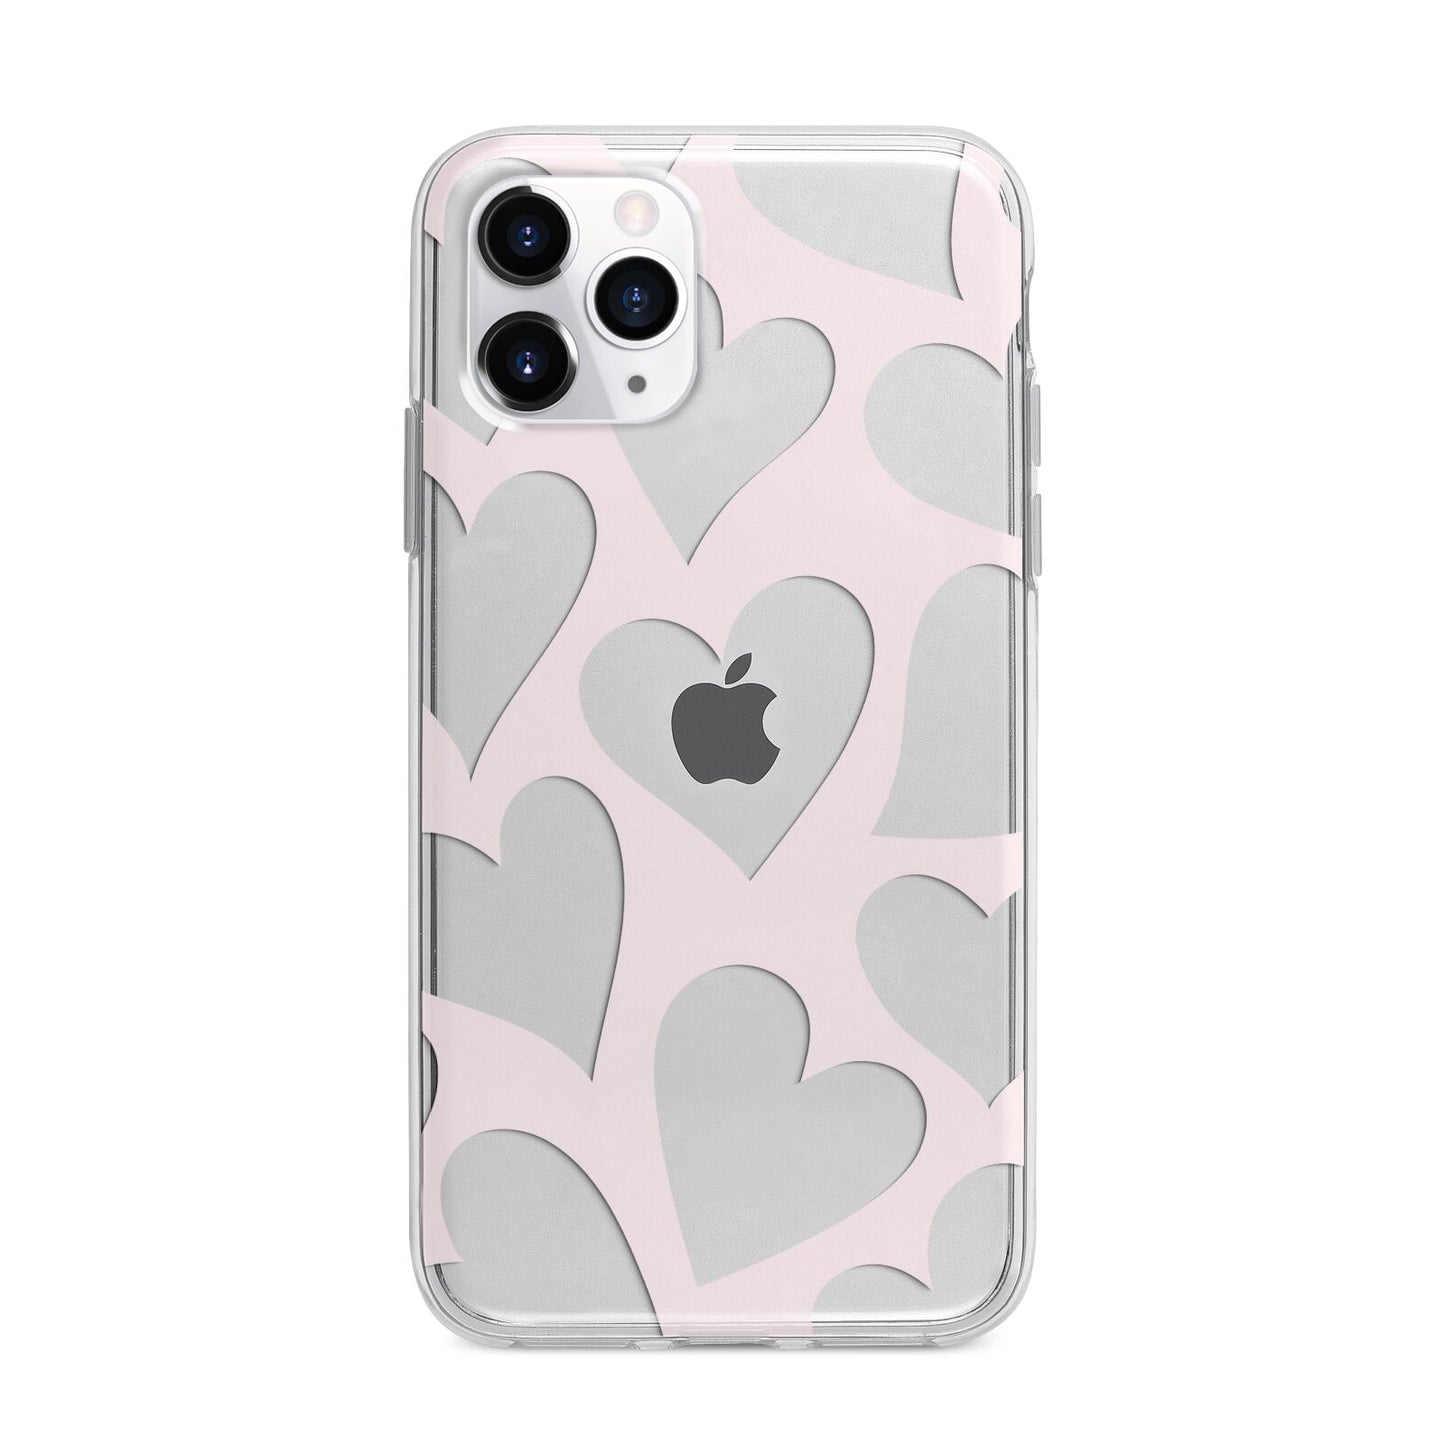 Heart Apple iPhone 11 Pro Max in Silver with Bumper Case